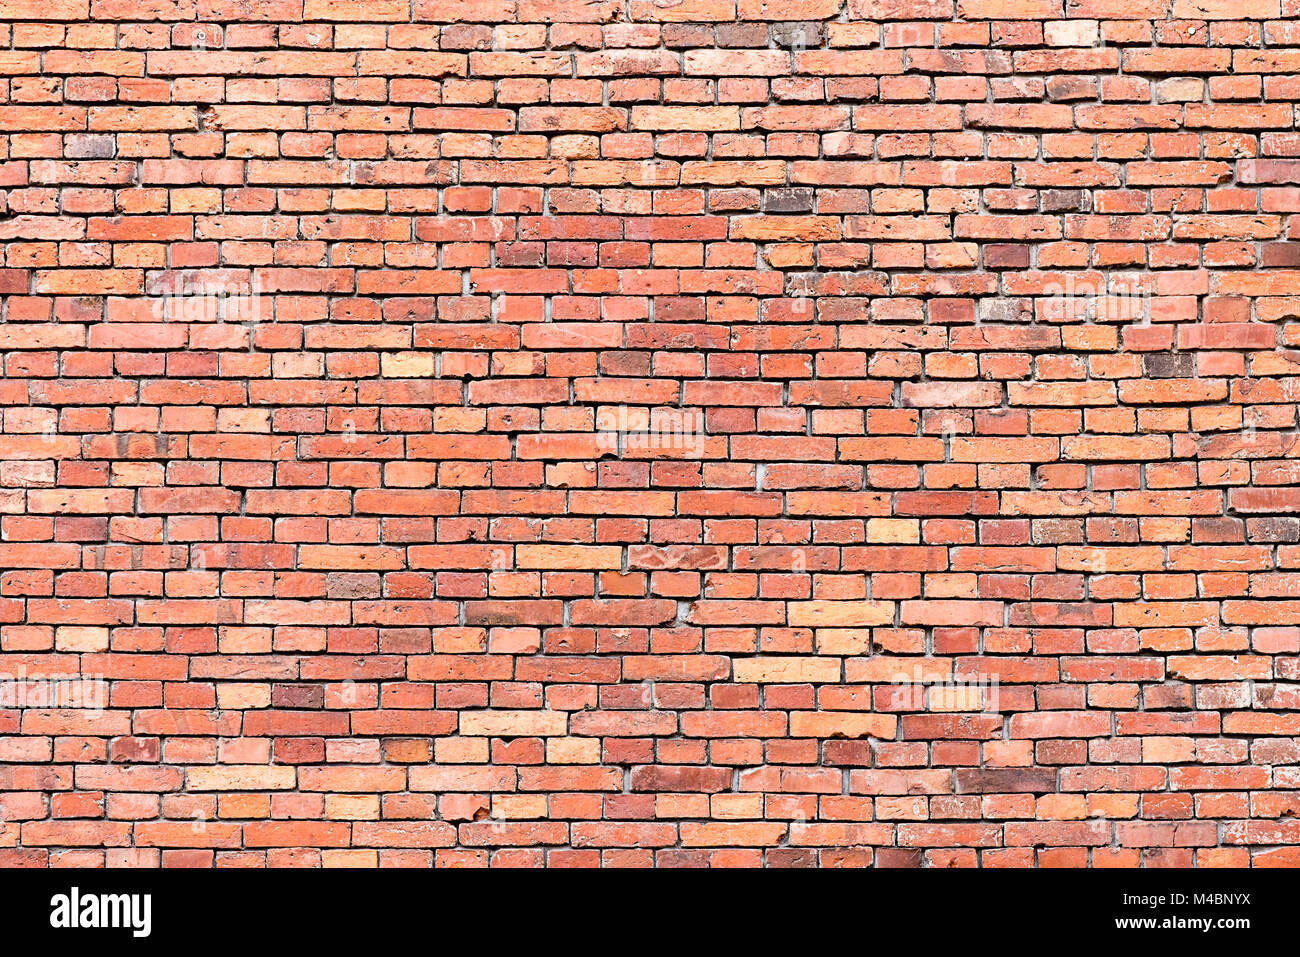 Background from a red brickwall Stock Photo